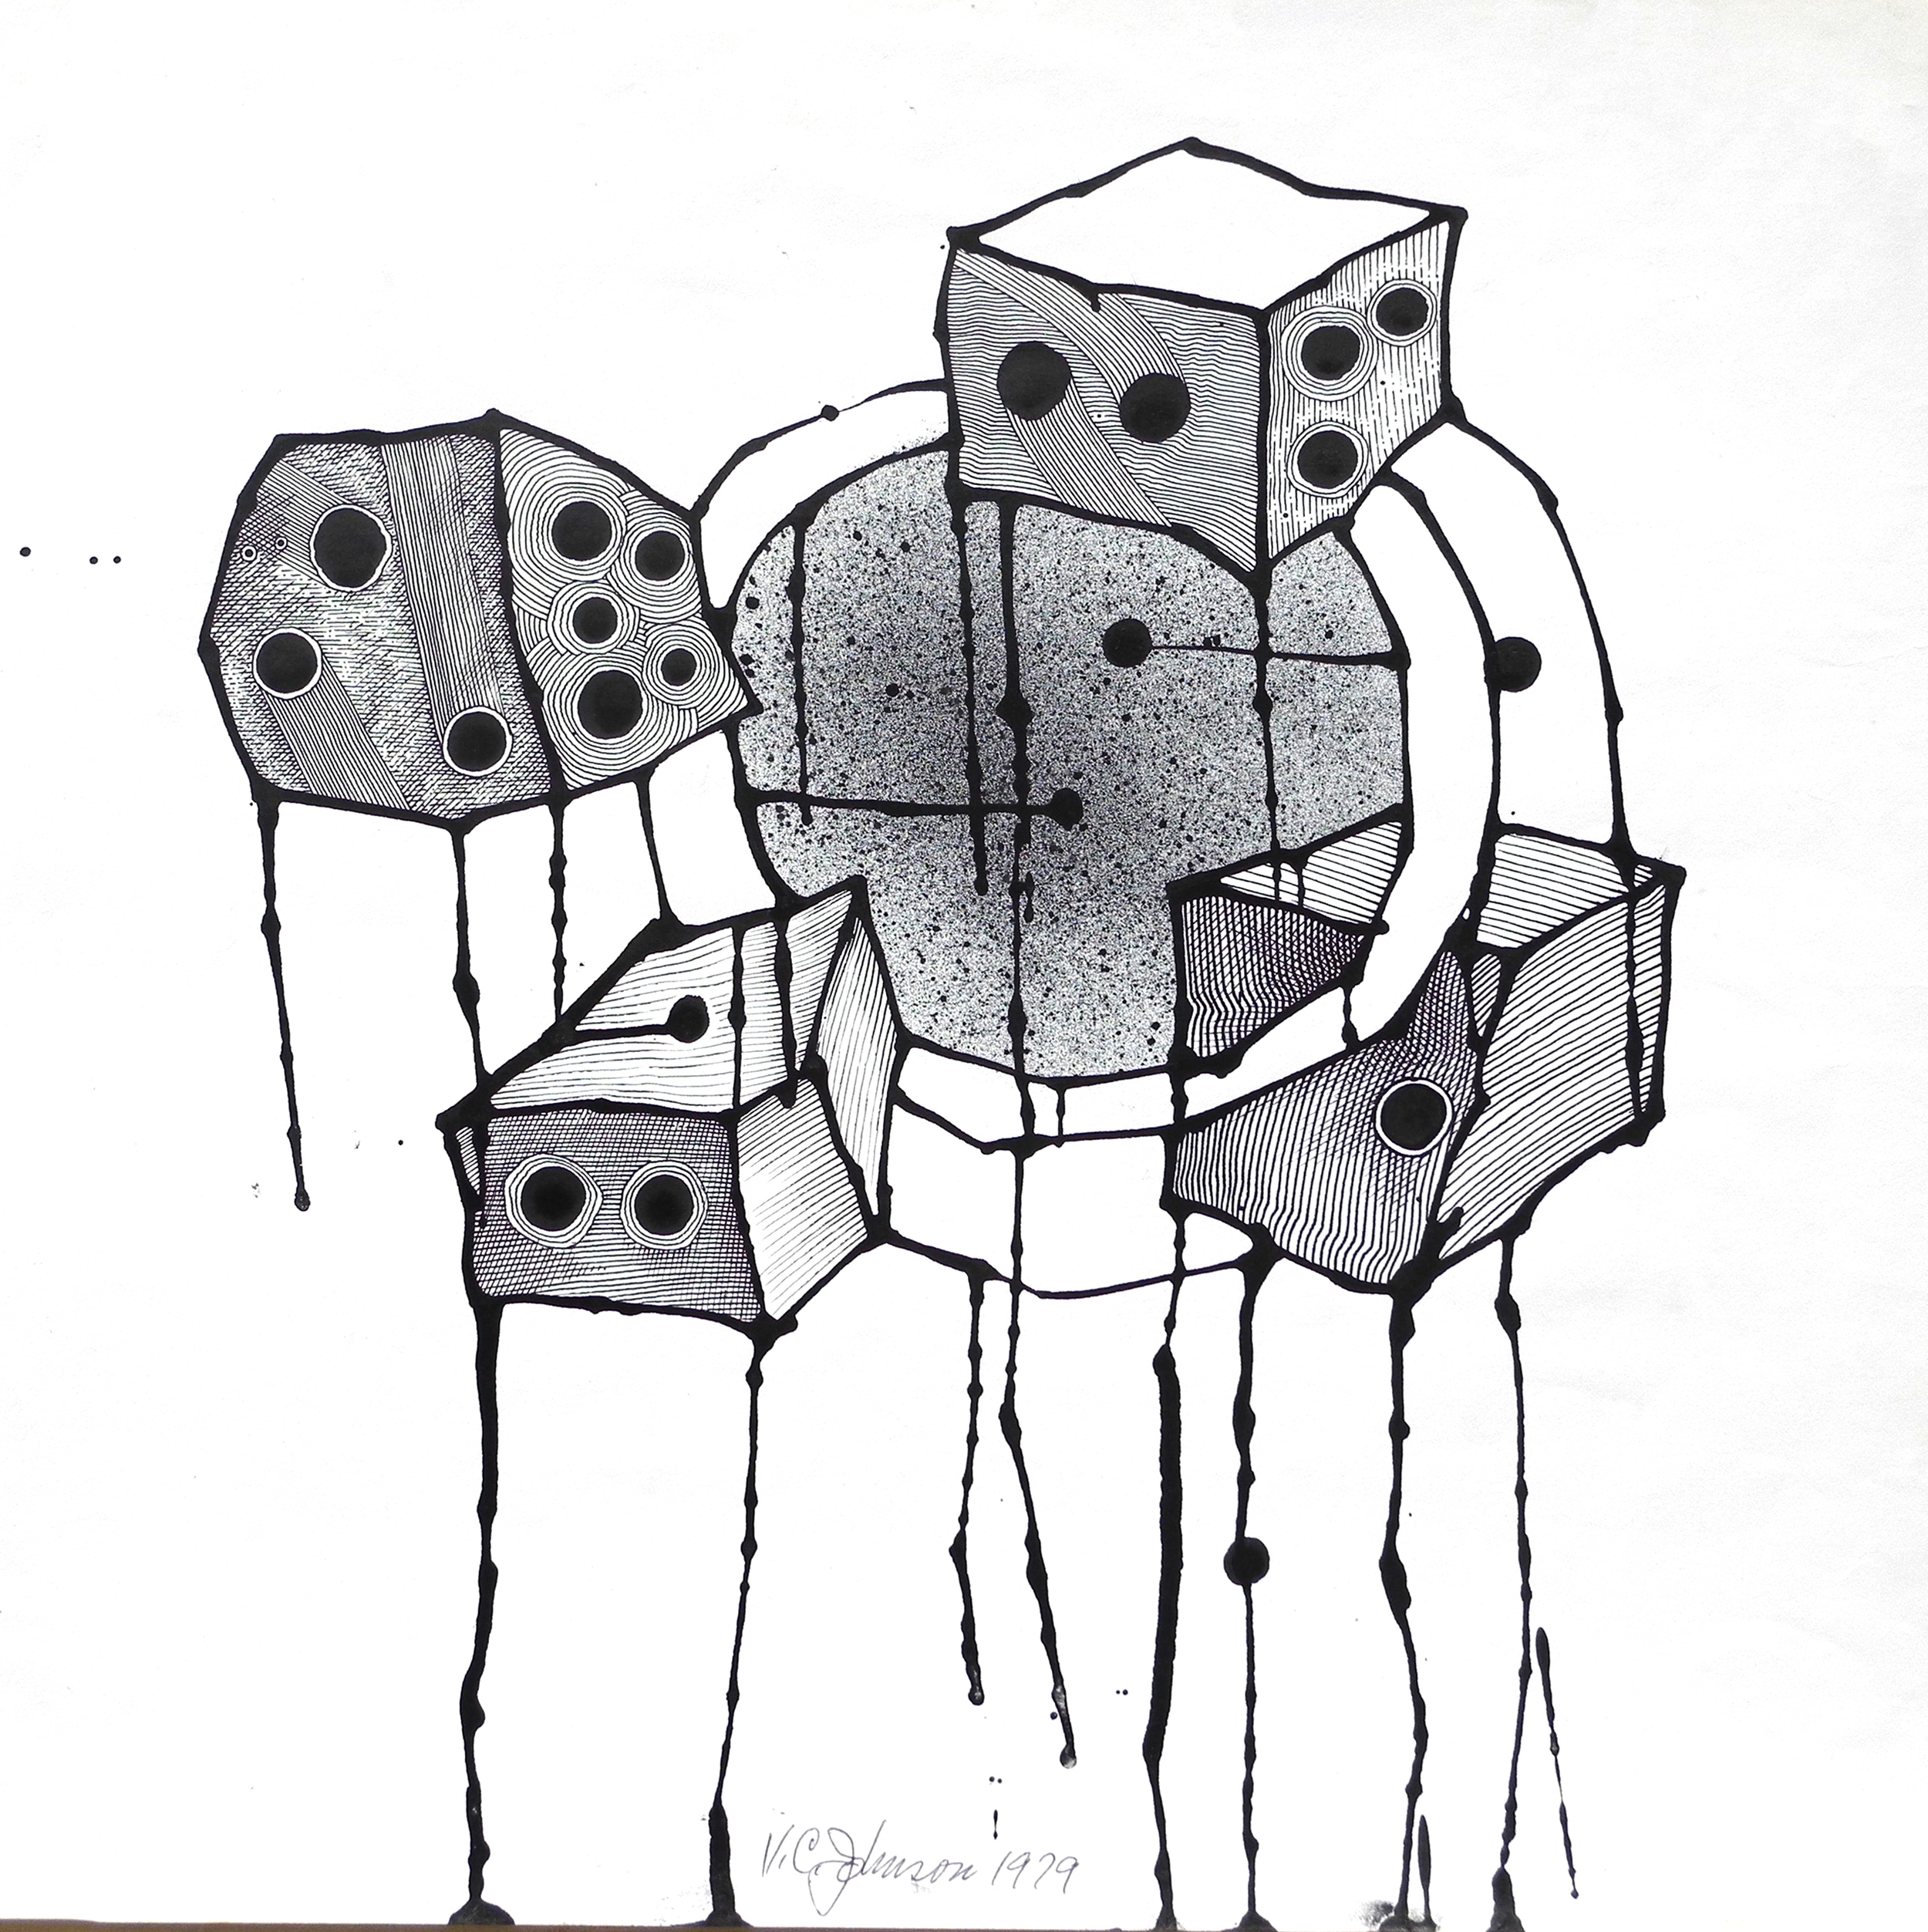 "No Dice" by Vernon Courtlandt Johnson. © 1979 VCJ. All rights reserved.